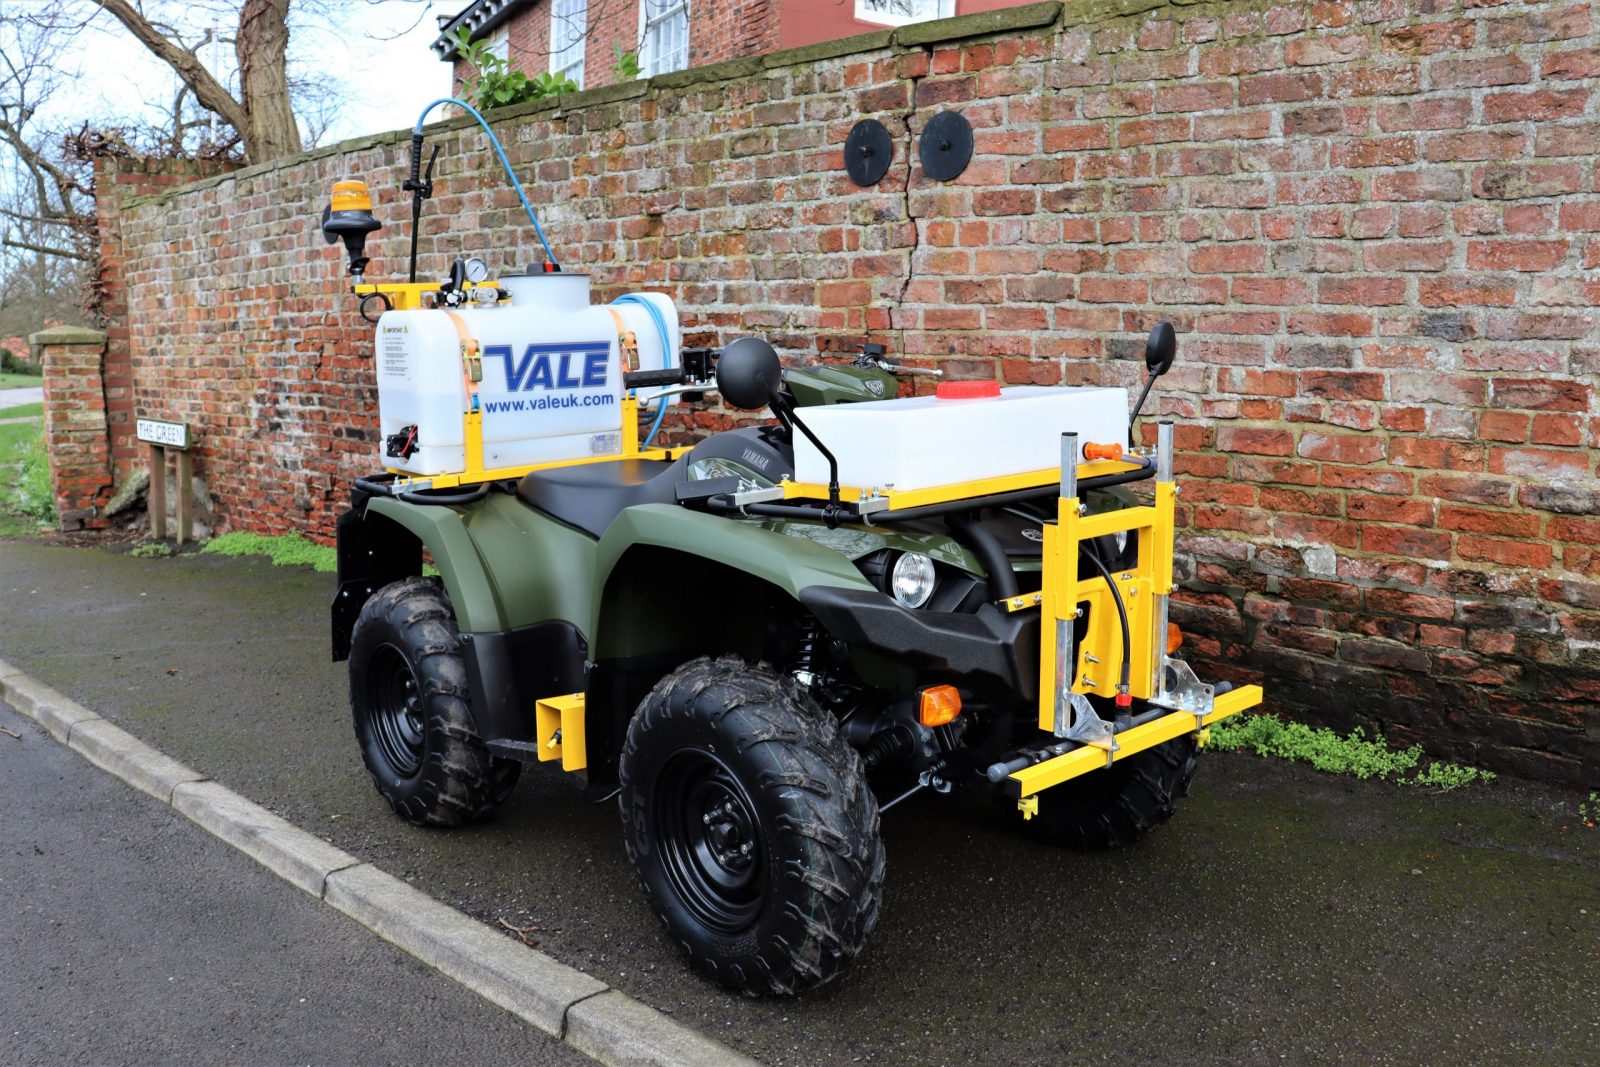 Incorporating the Yamaha Kodiak 450 ATV quad bike, the design has been developed along with legislation, health & safety best practice and all relevant codes of practice